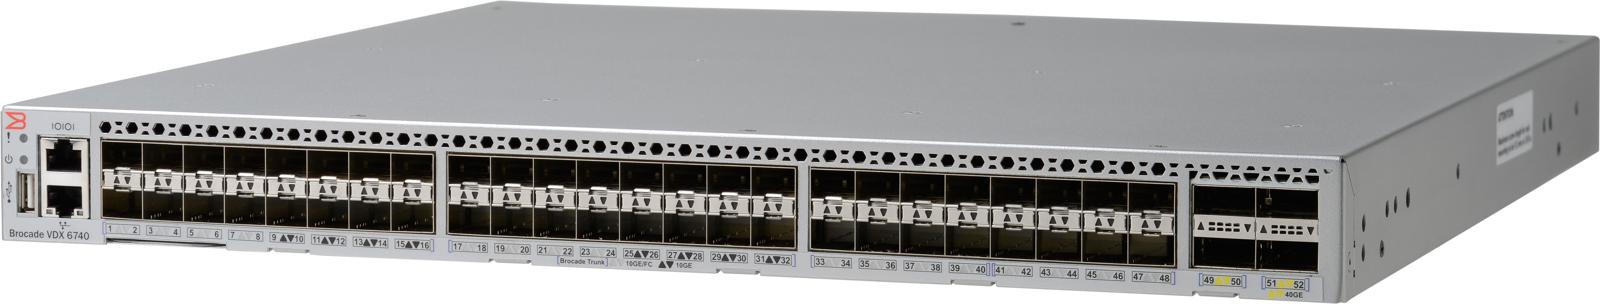 Brocade VDX 6740, 6740T, 6740T-1G Switches